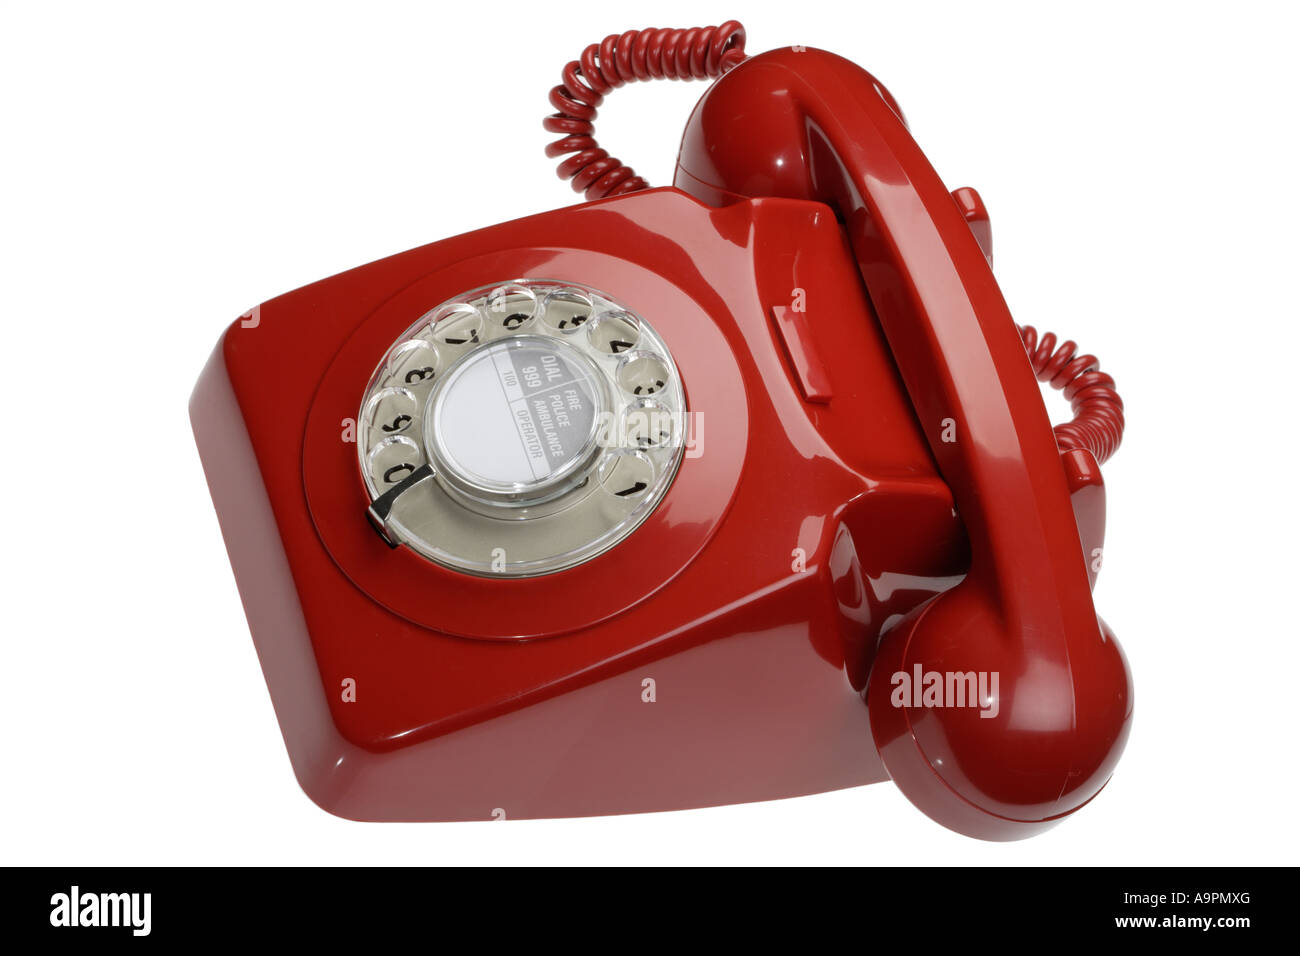 Red old fashioned disc dialling phone Stock Photo - Alamy